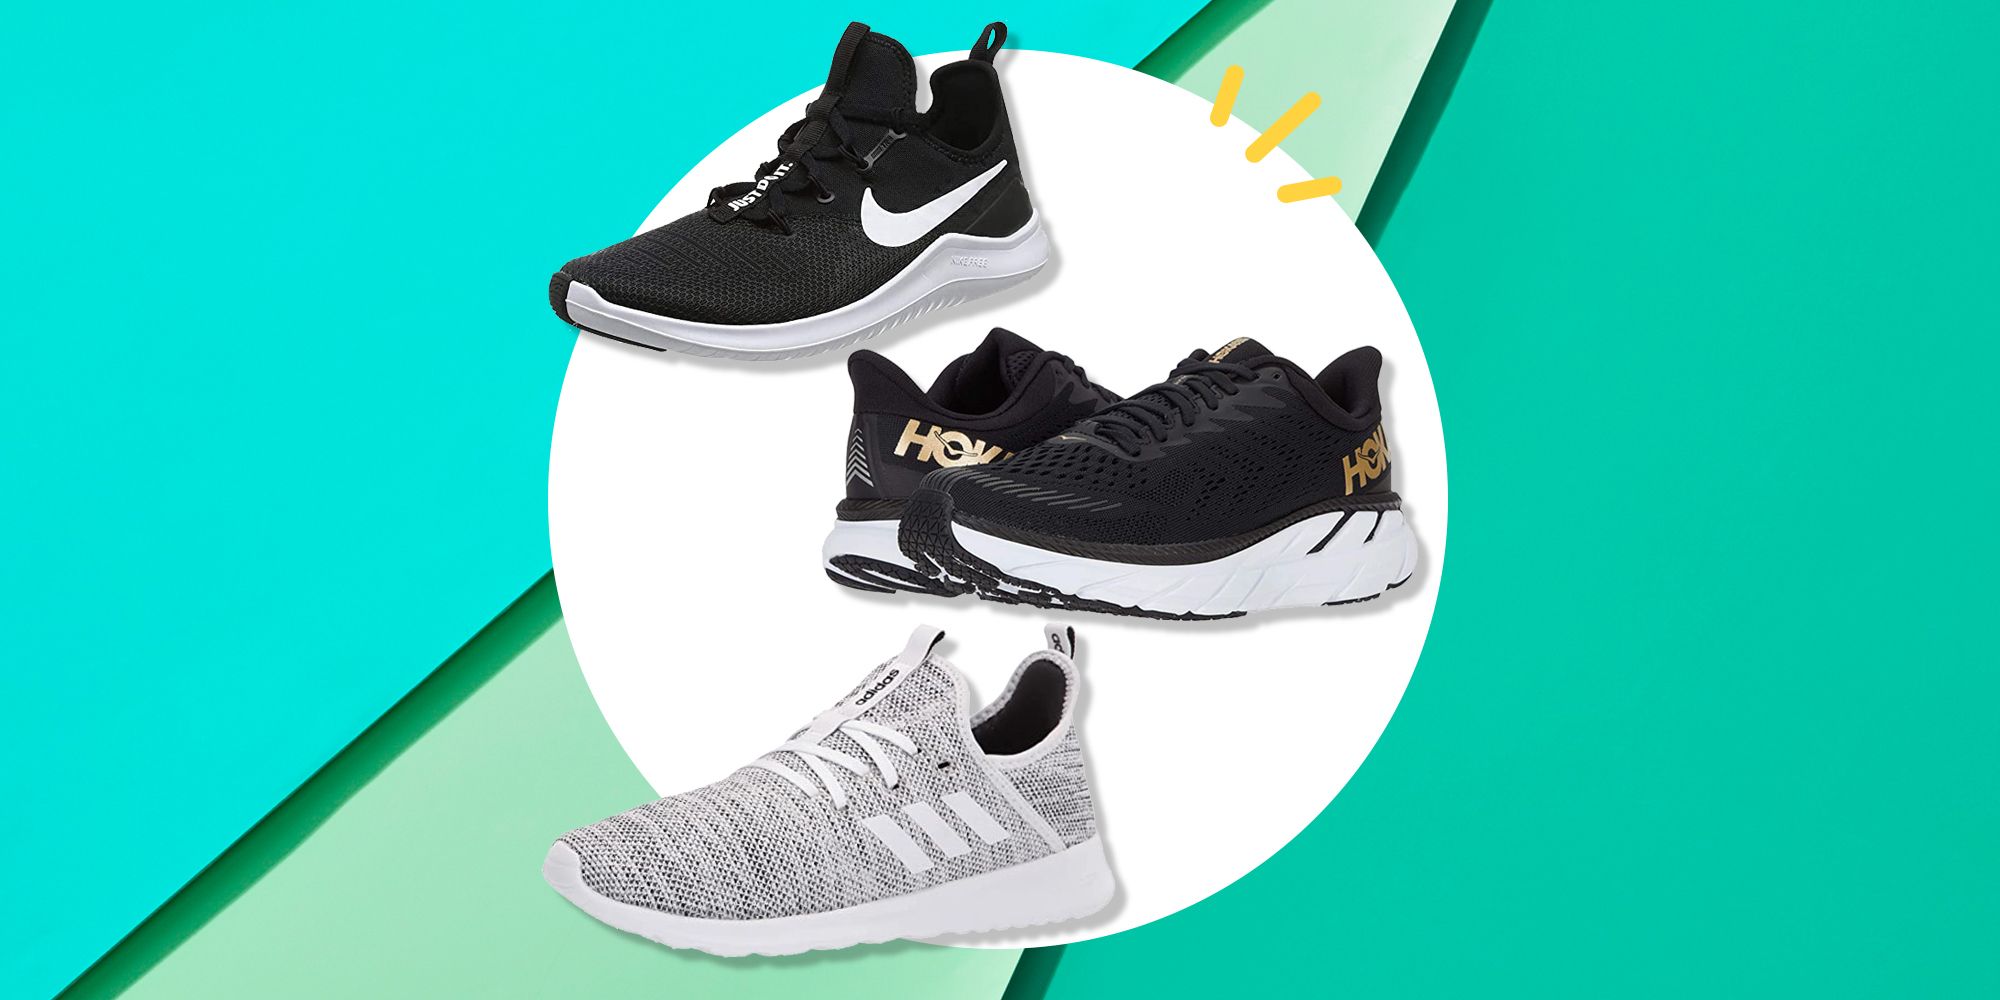 Black Friday Sneaker Deals - Nike, Adidas, New Balance, and More - Updated  Daily